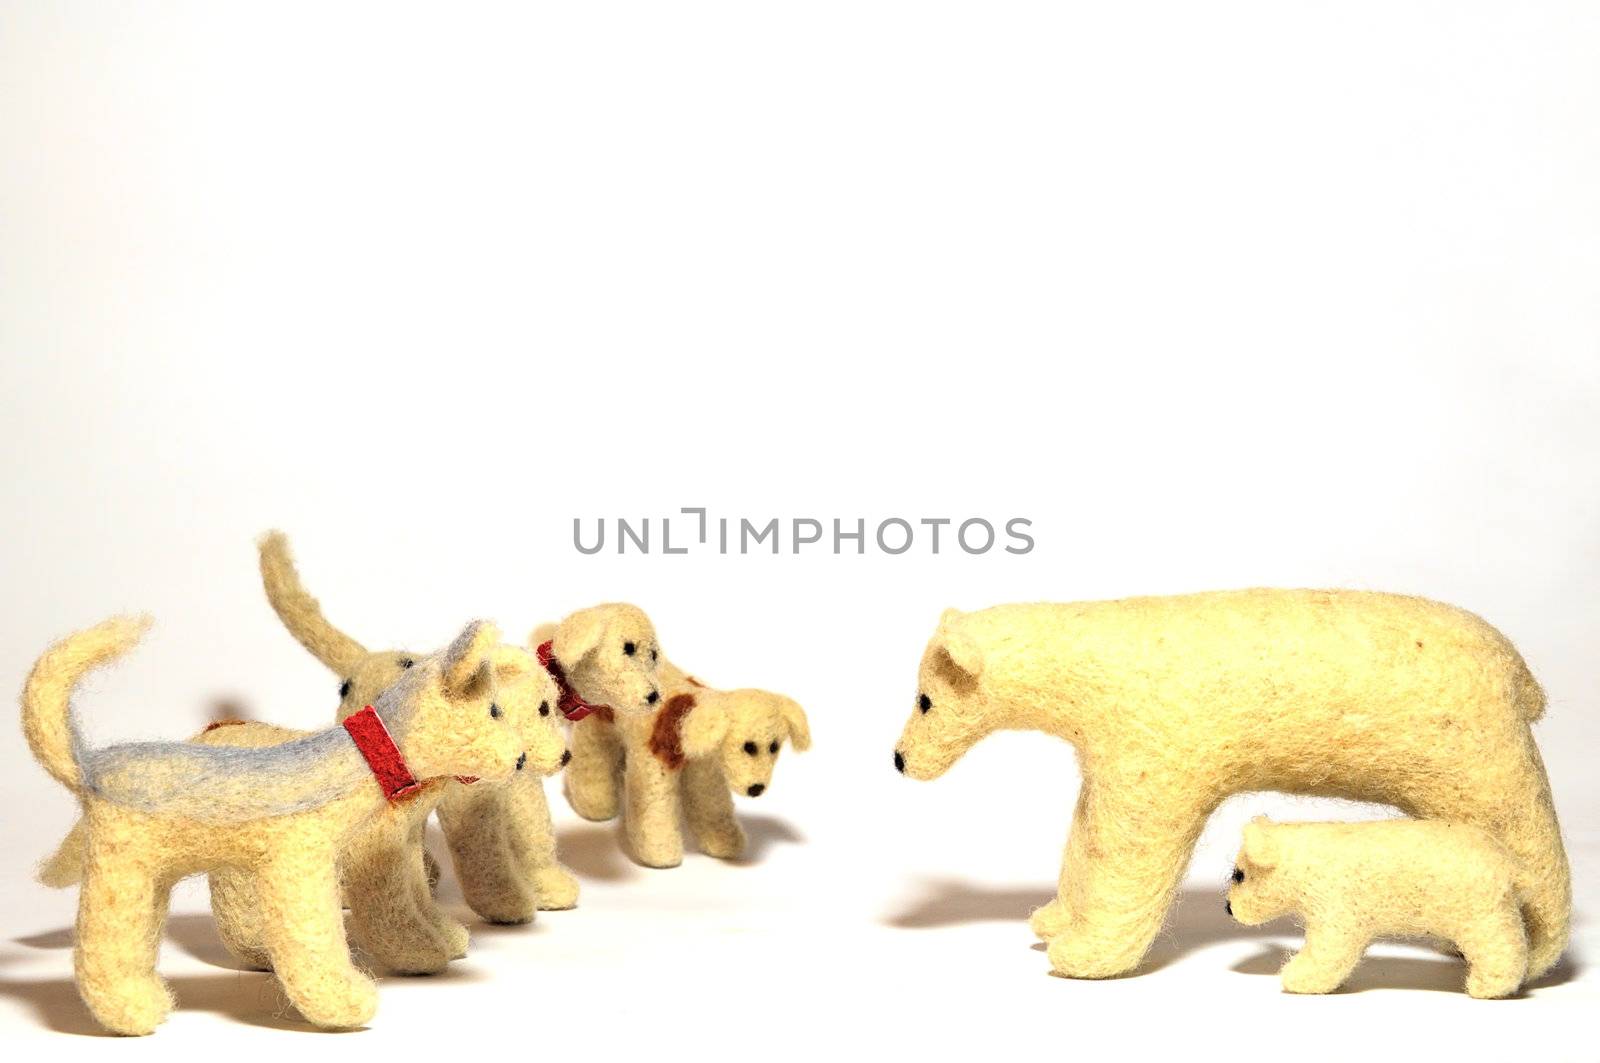 stuffed animals, dogs attacking a bears, close-up